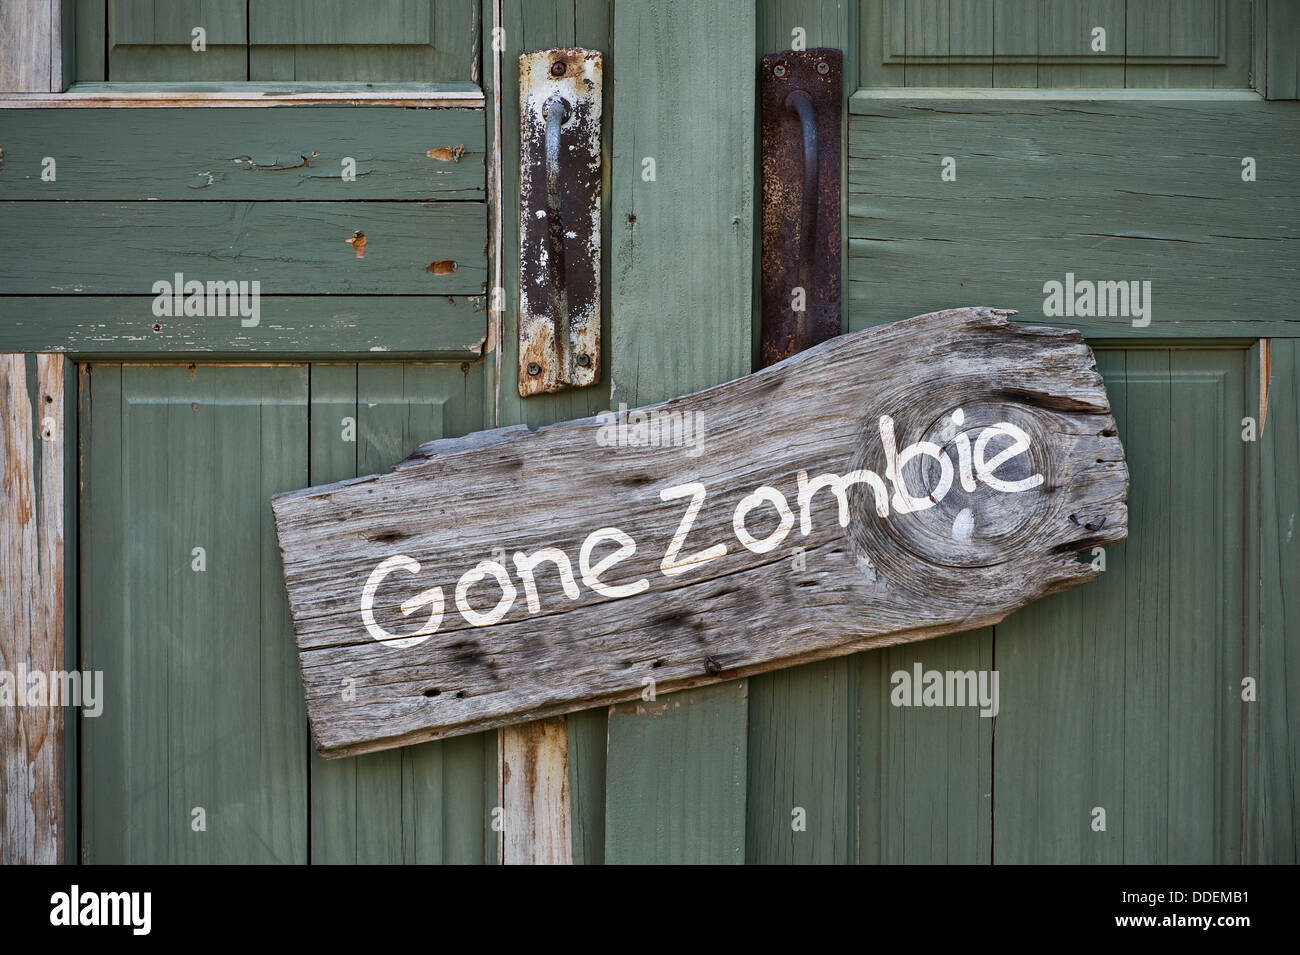 Fort Zombie Sign. Stockfoto